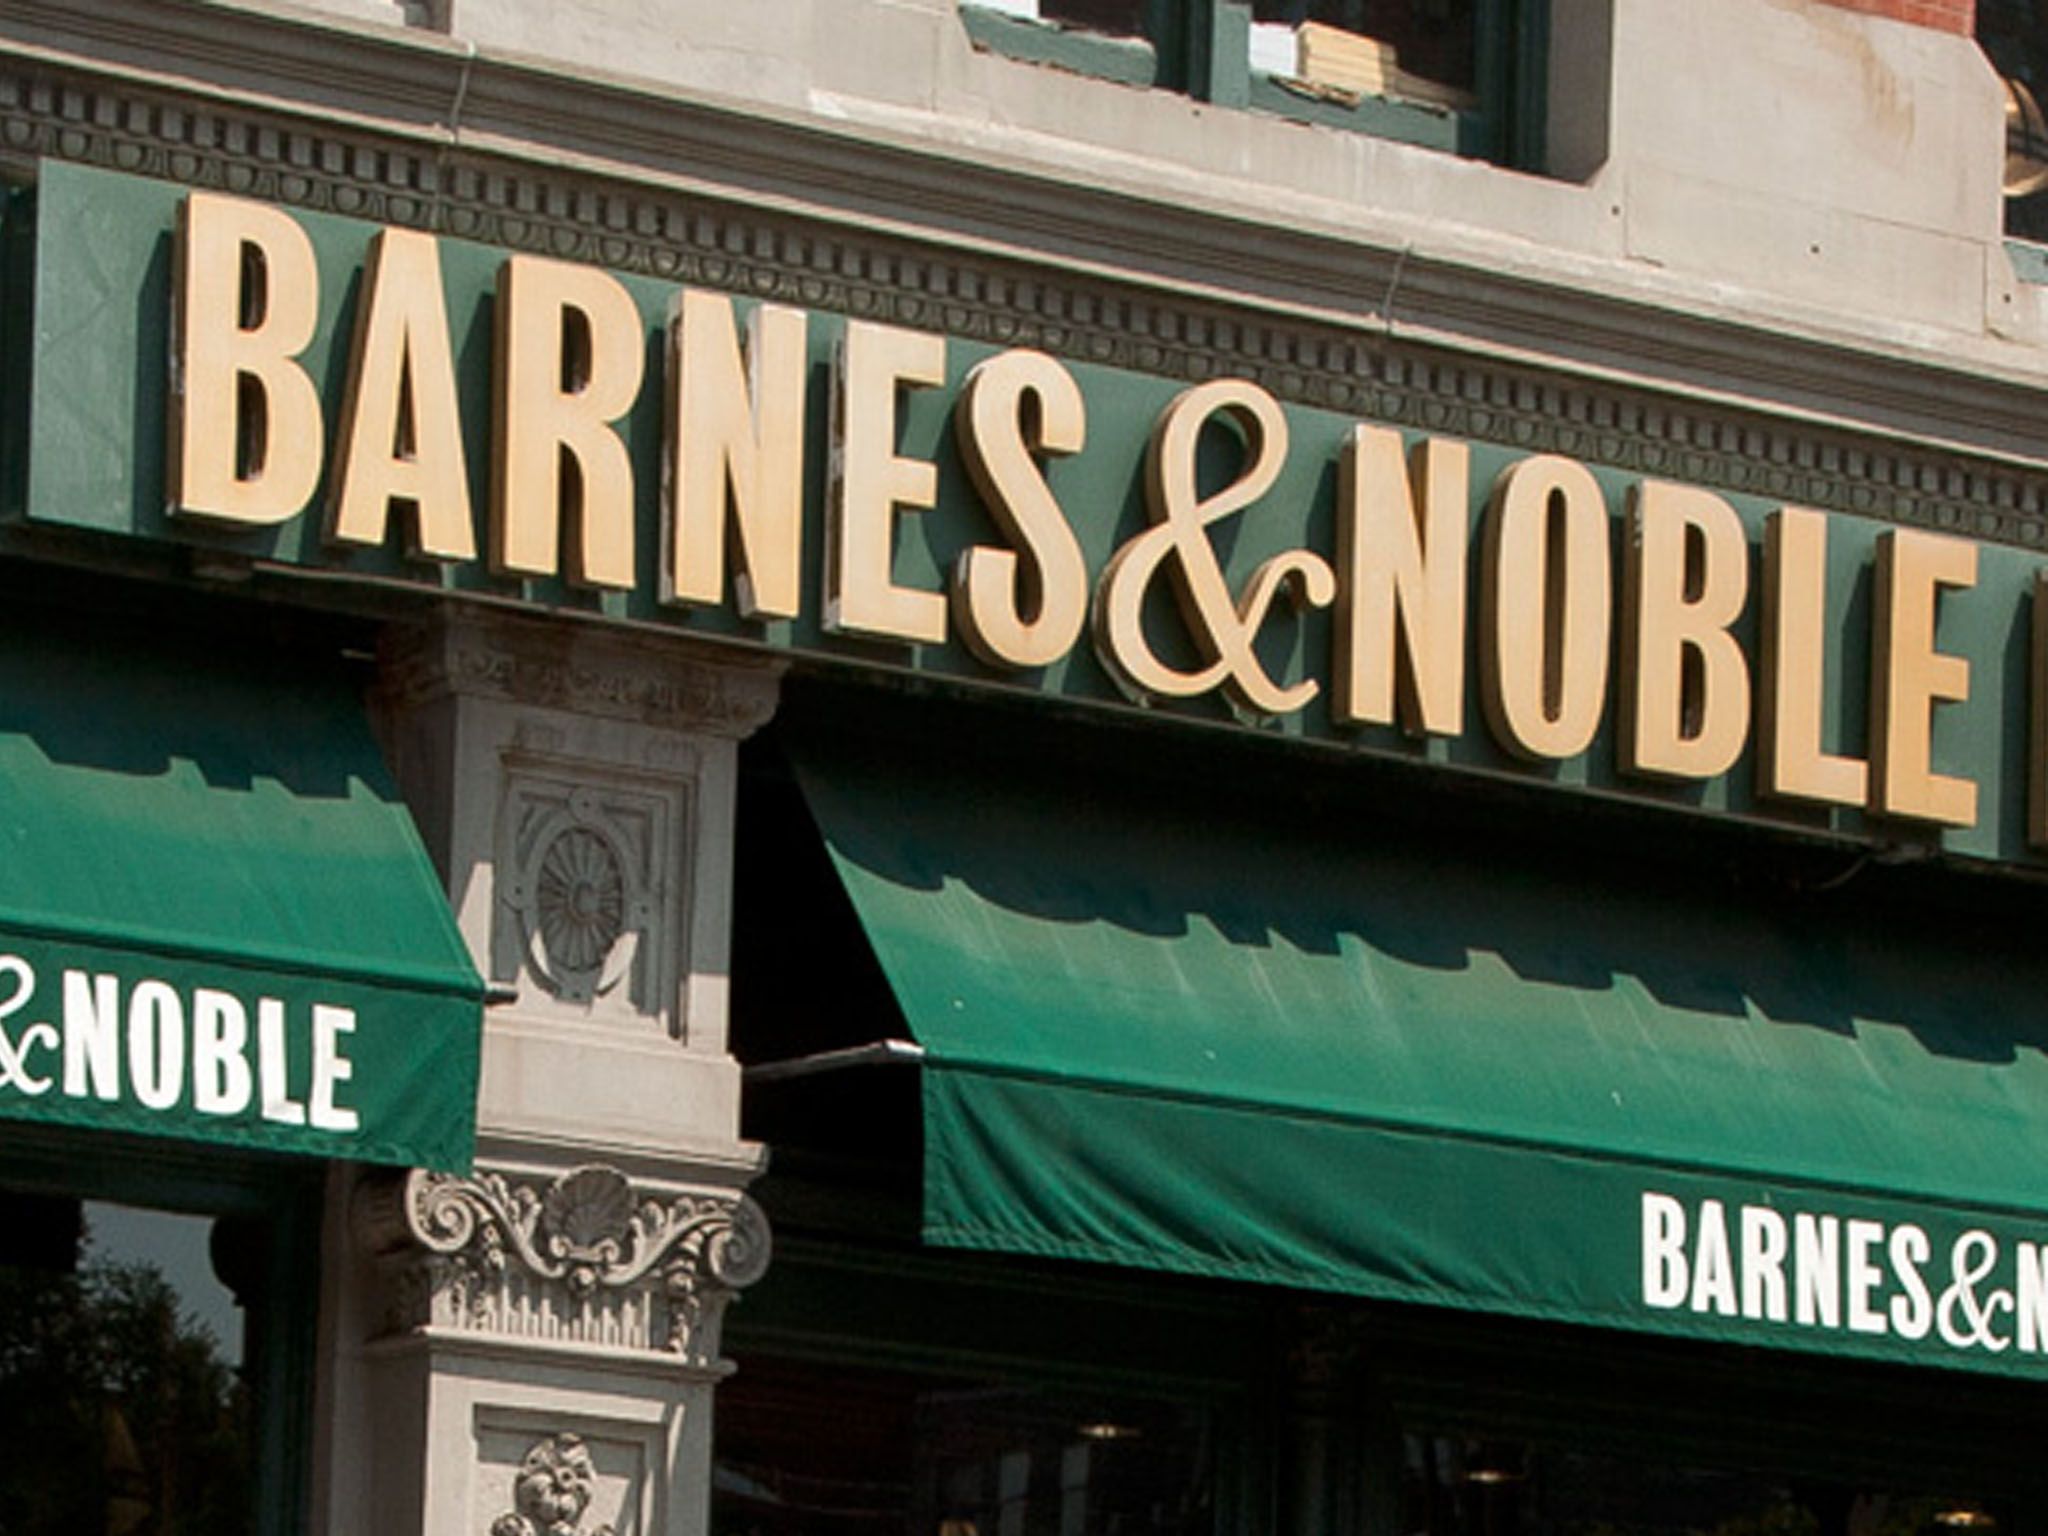 Barnes & Noble warns layoffs probable due to corona closures